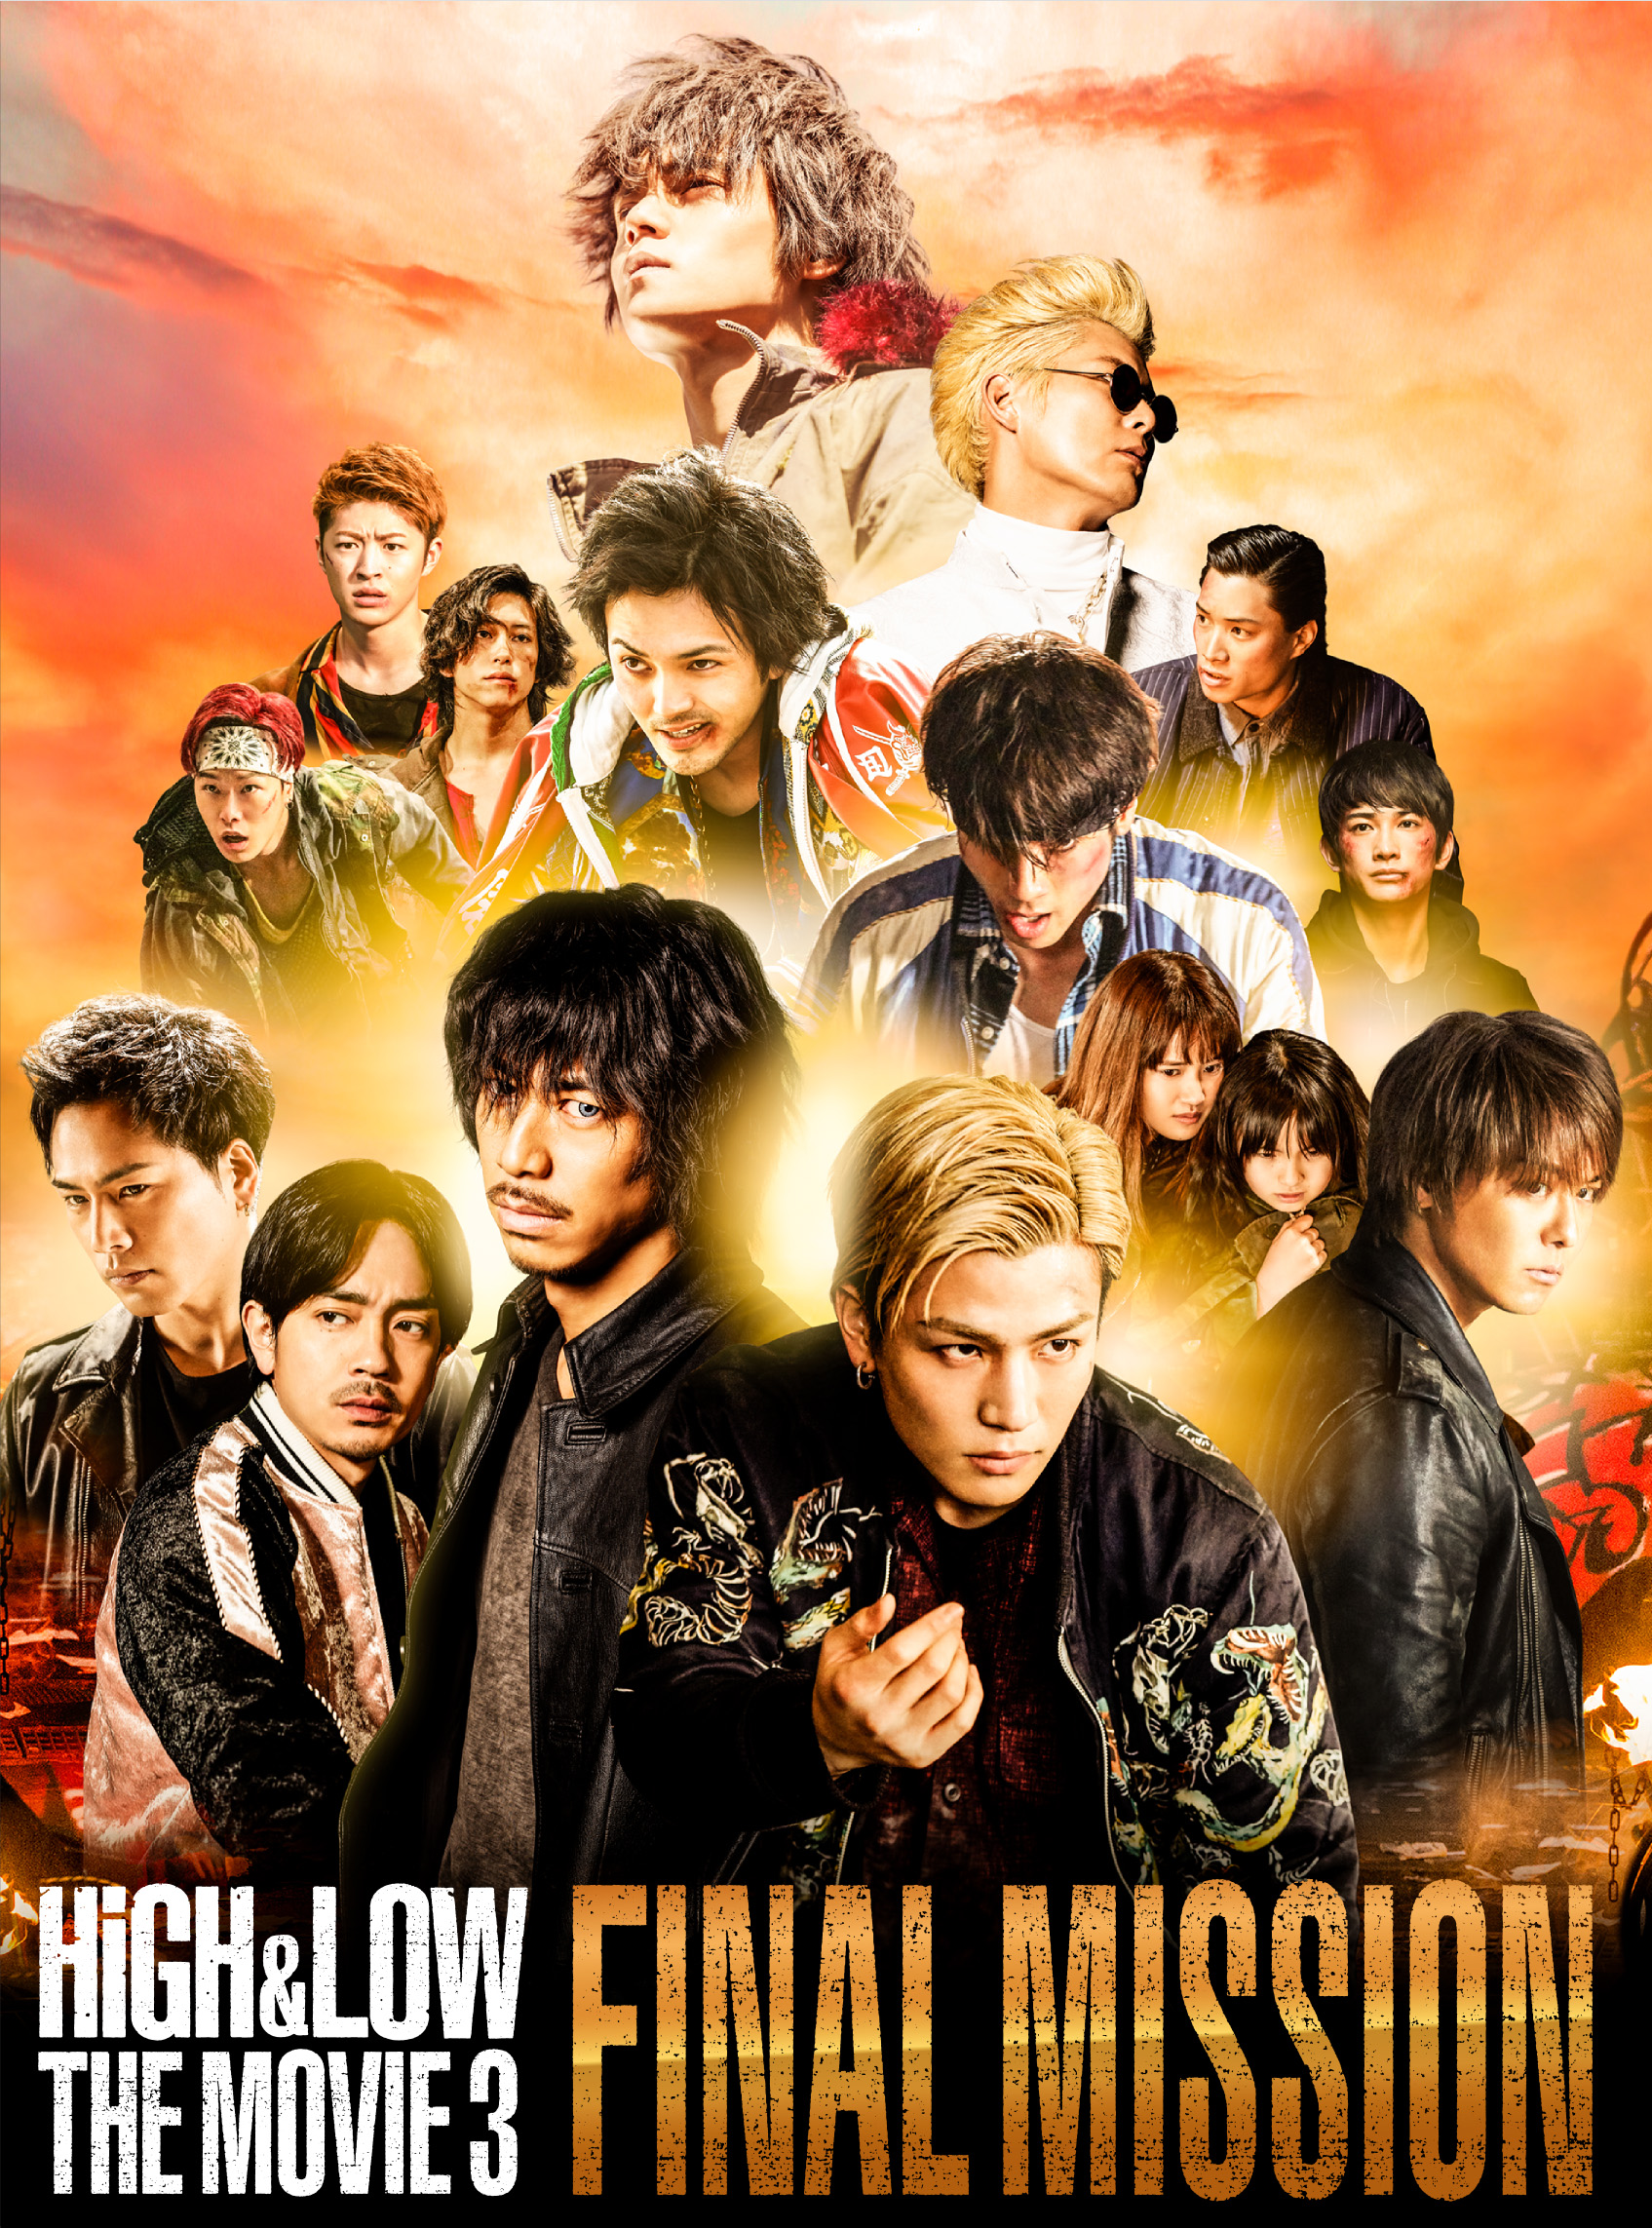 HiGH & LOW THE MOVIE 3 / FINAL MISSION」DVD SITE